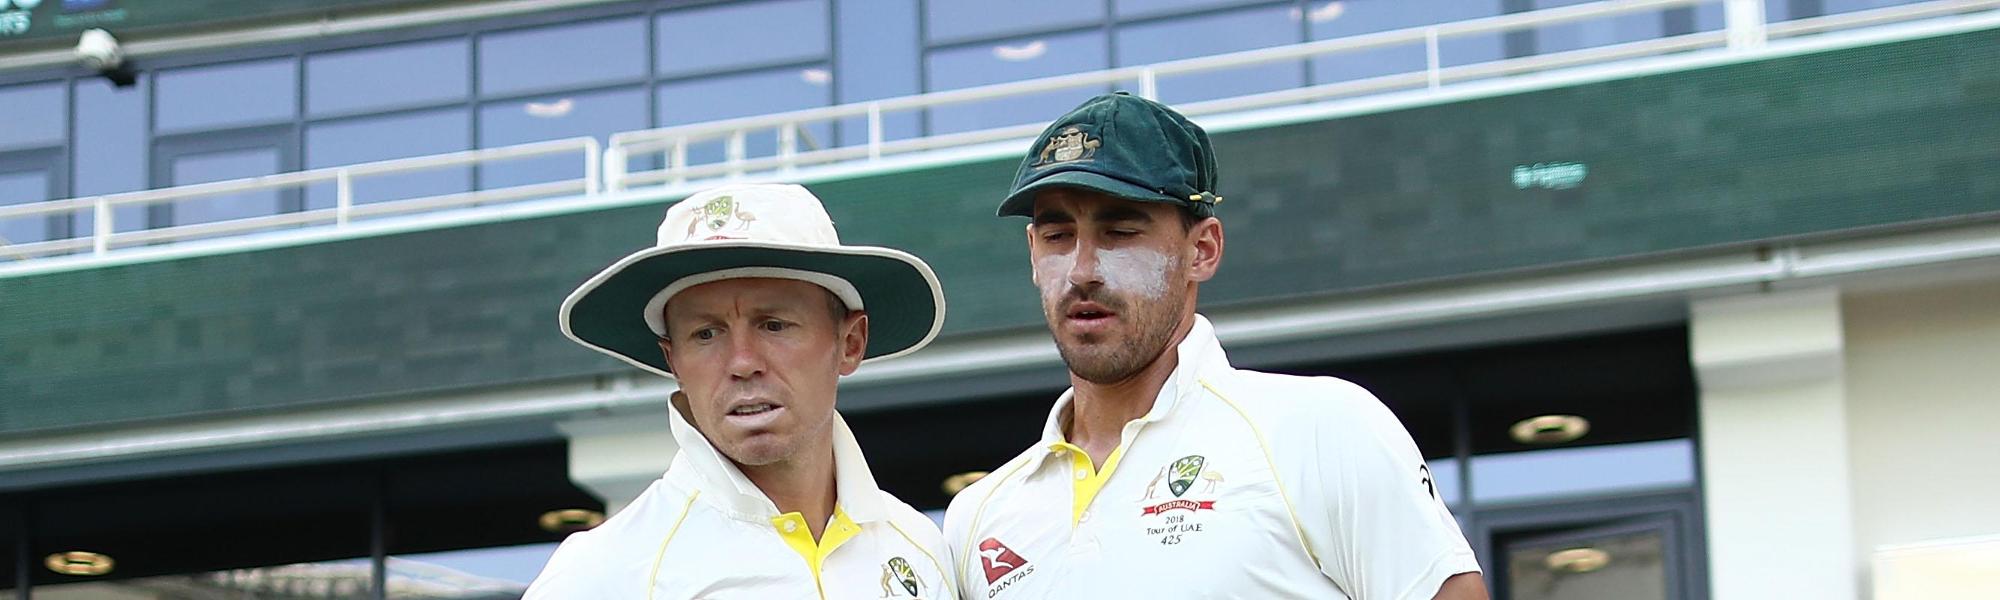 Siddle called up to T20I squad as cover for Starc